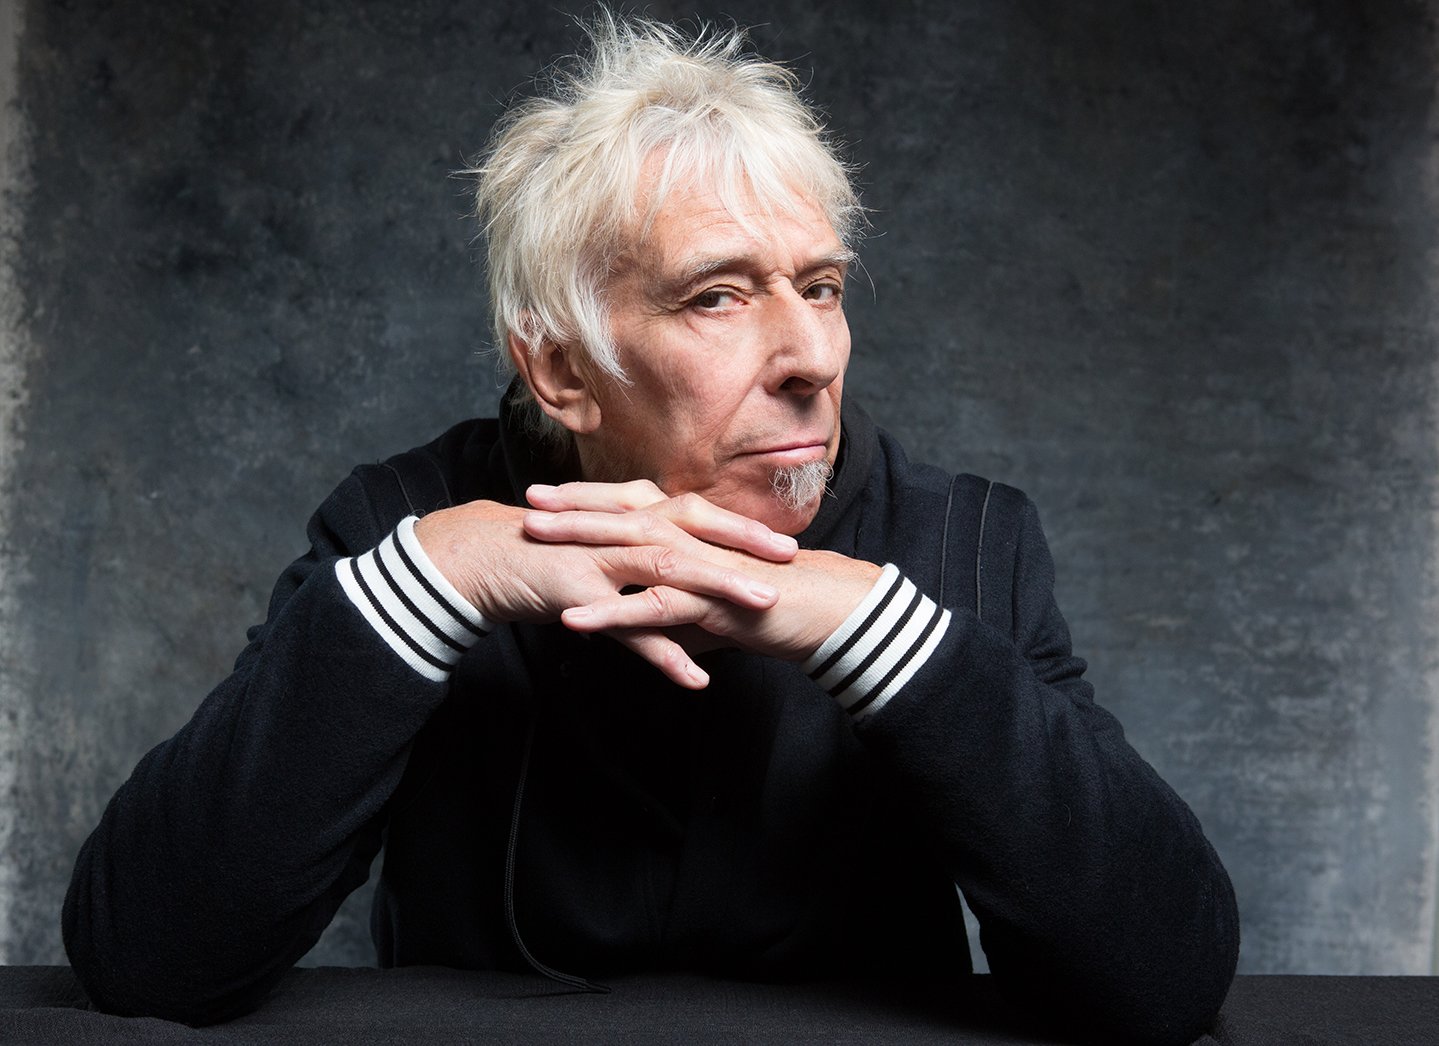  Happy birthday to one of the greats.

John Cale 